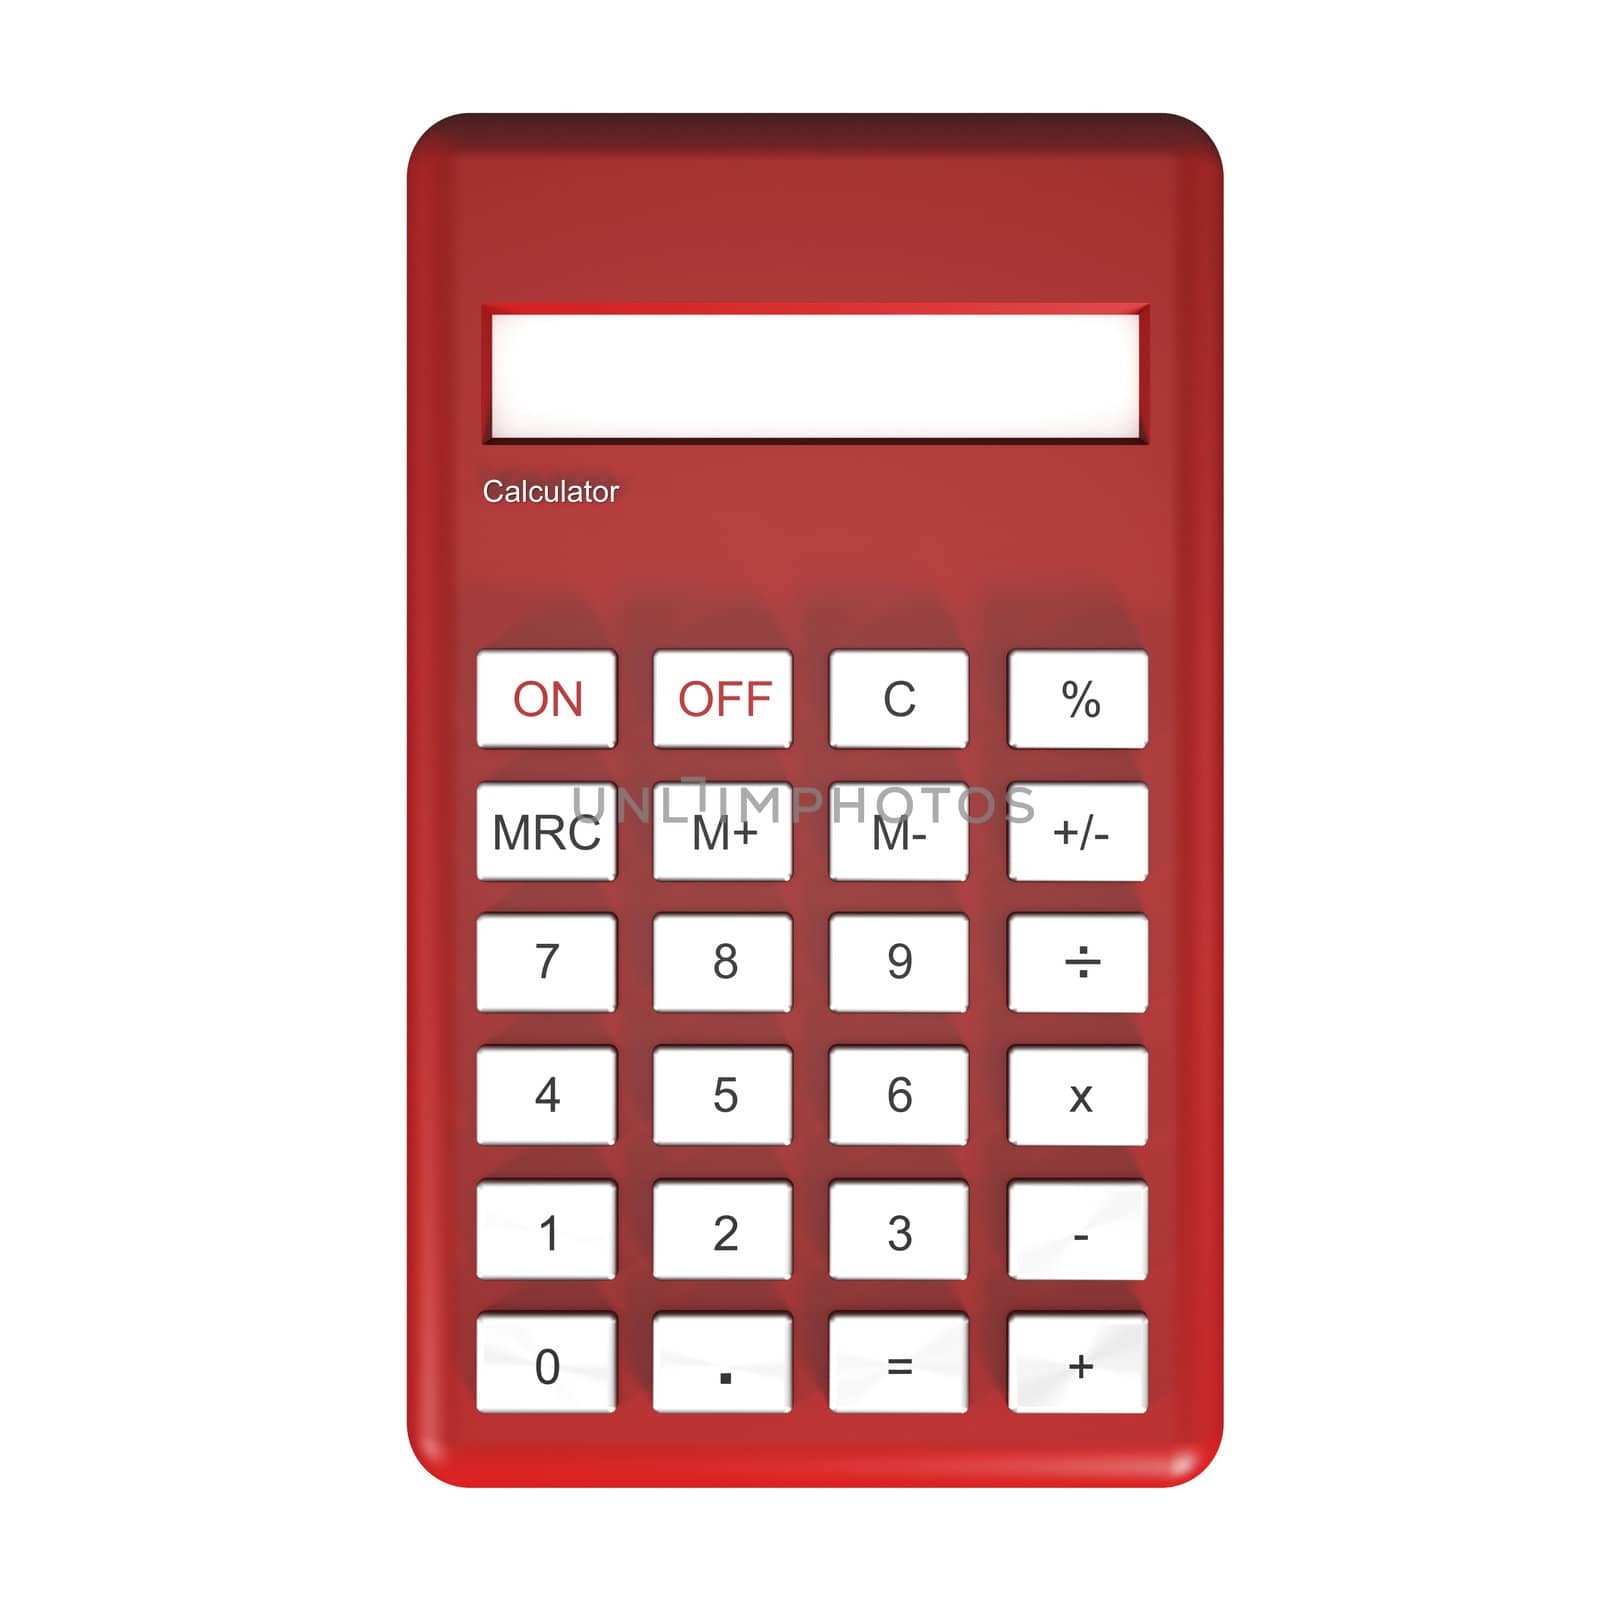 Red calculator isolated on white background.